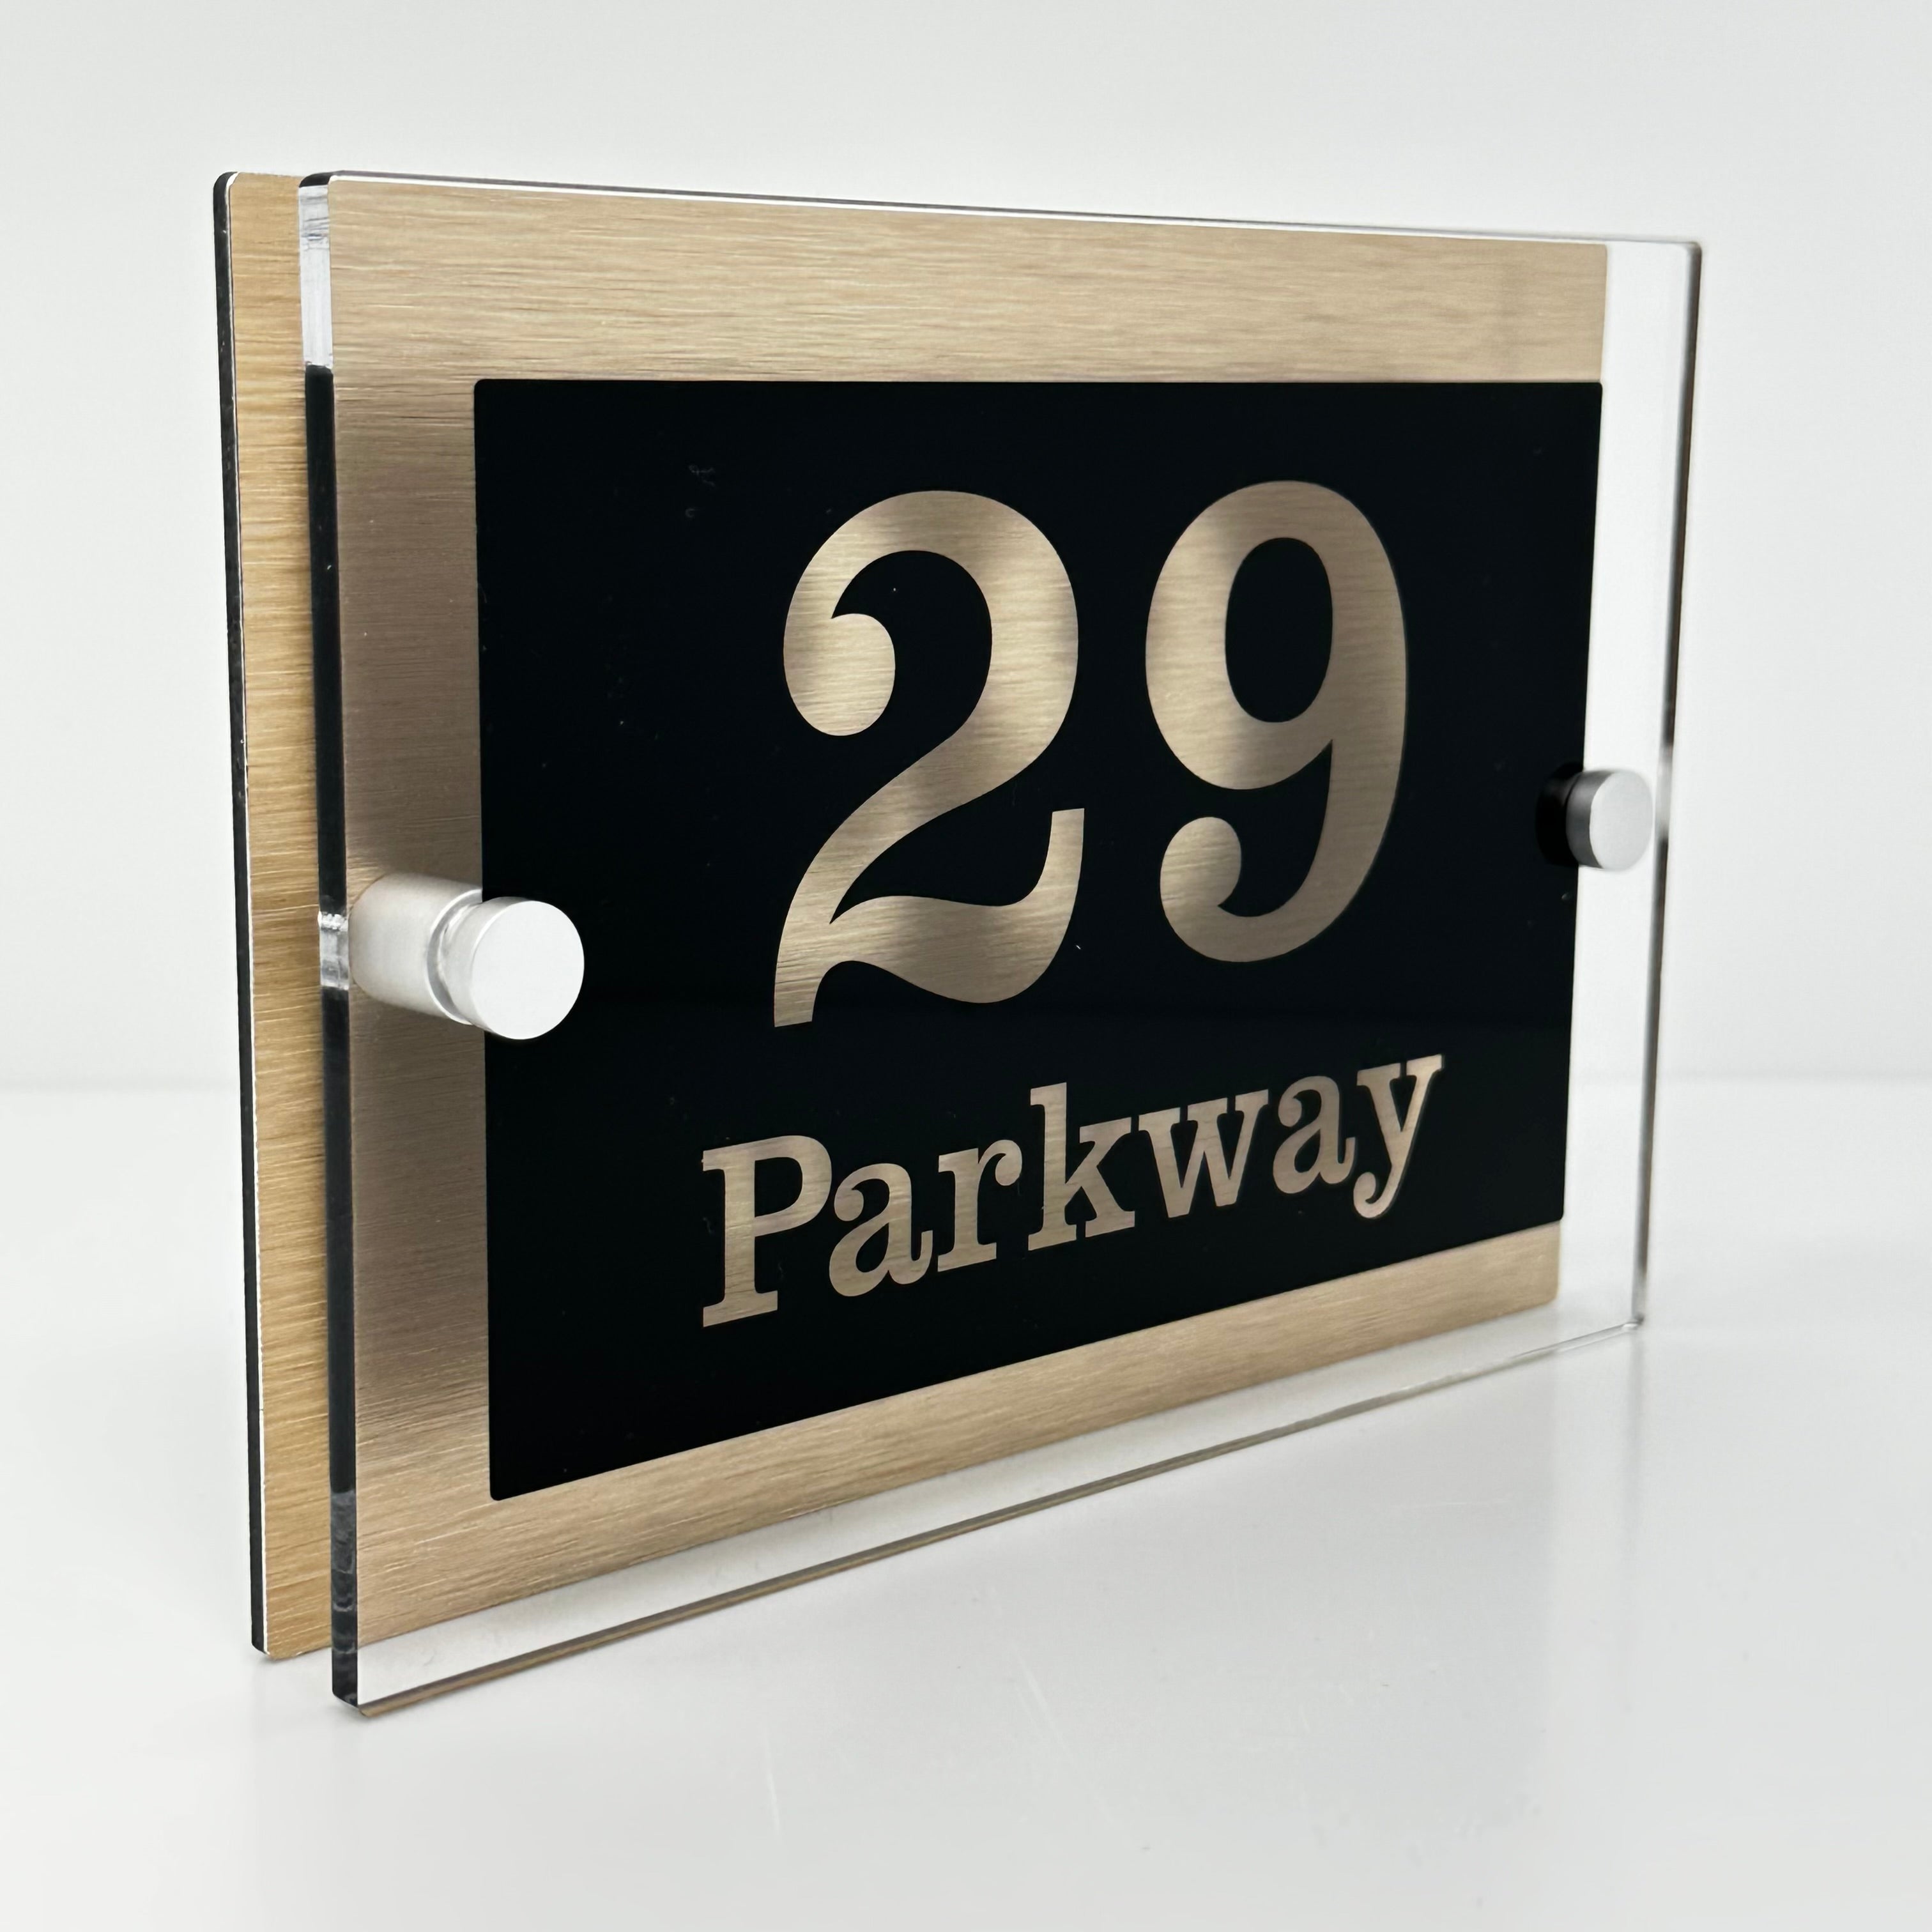 The Parkway Modern House Sign with Perspex Acrylic Front, Brass Rear Panel and Satin Silver Stand Off Fixings ( Size - 20cm x 14cm )